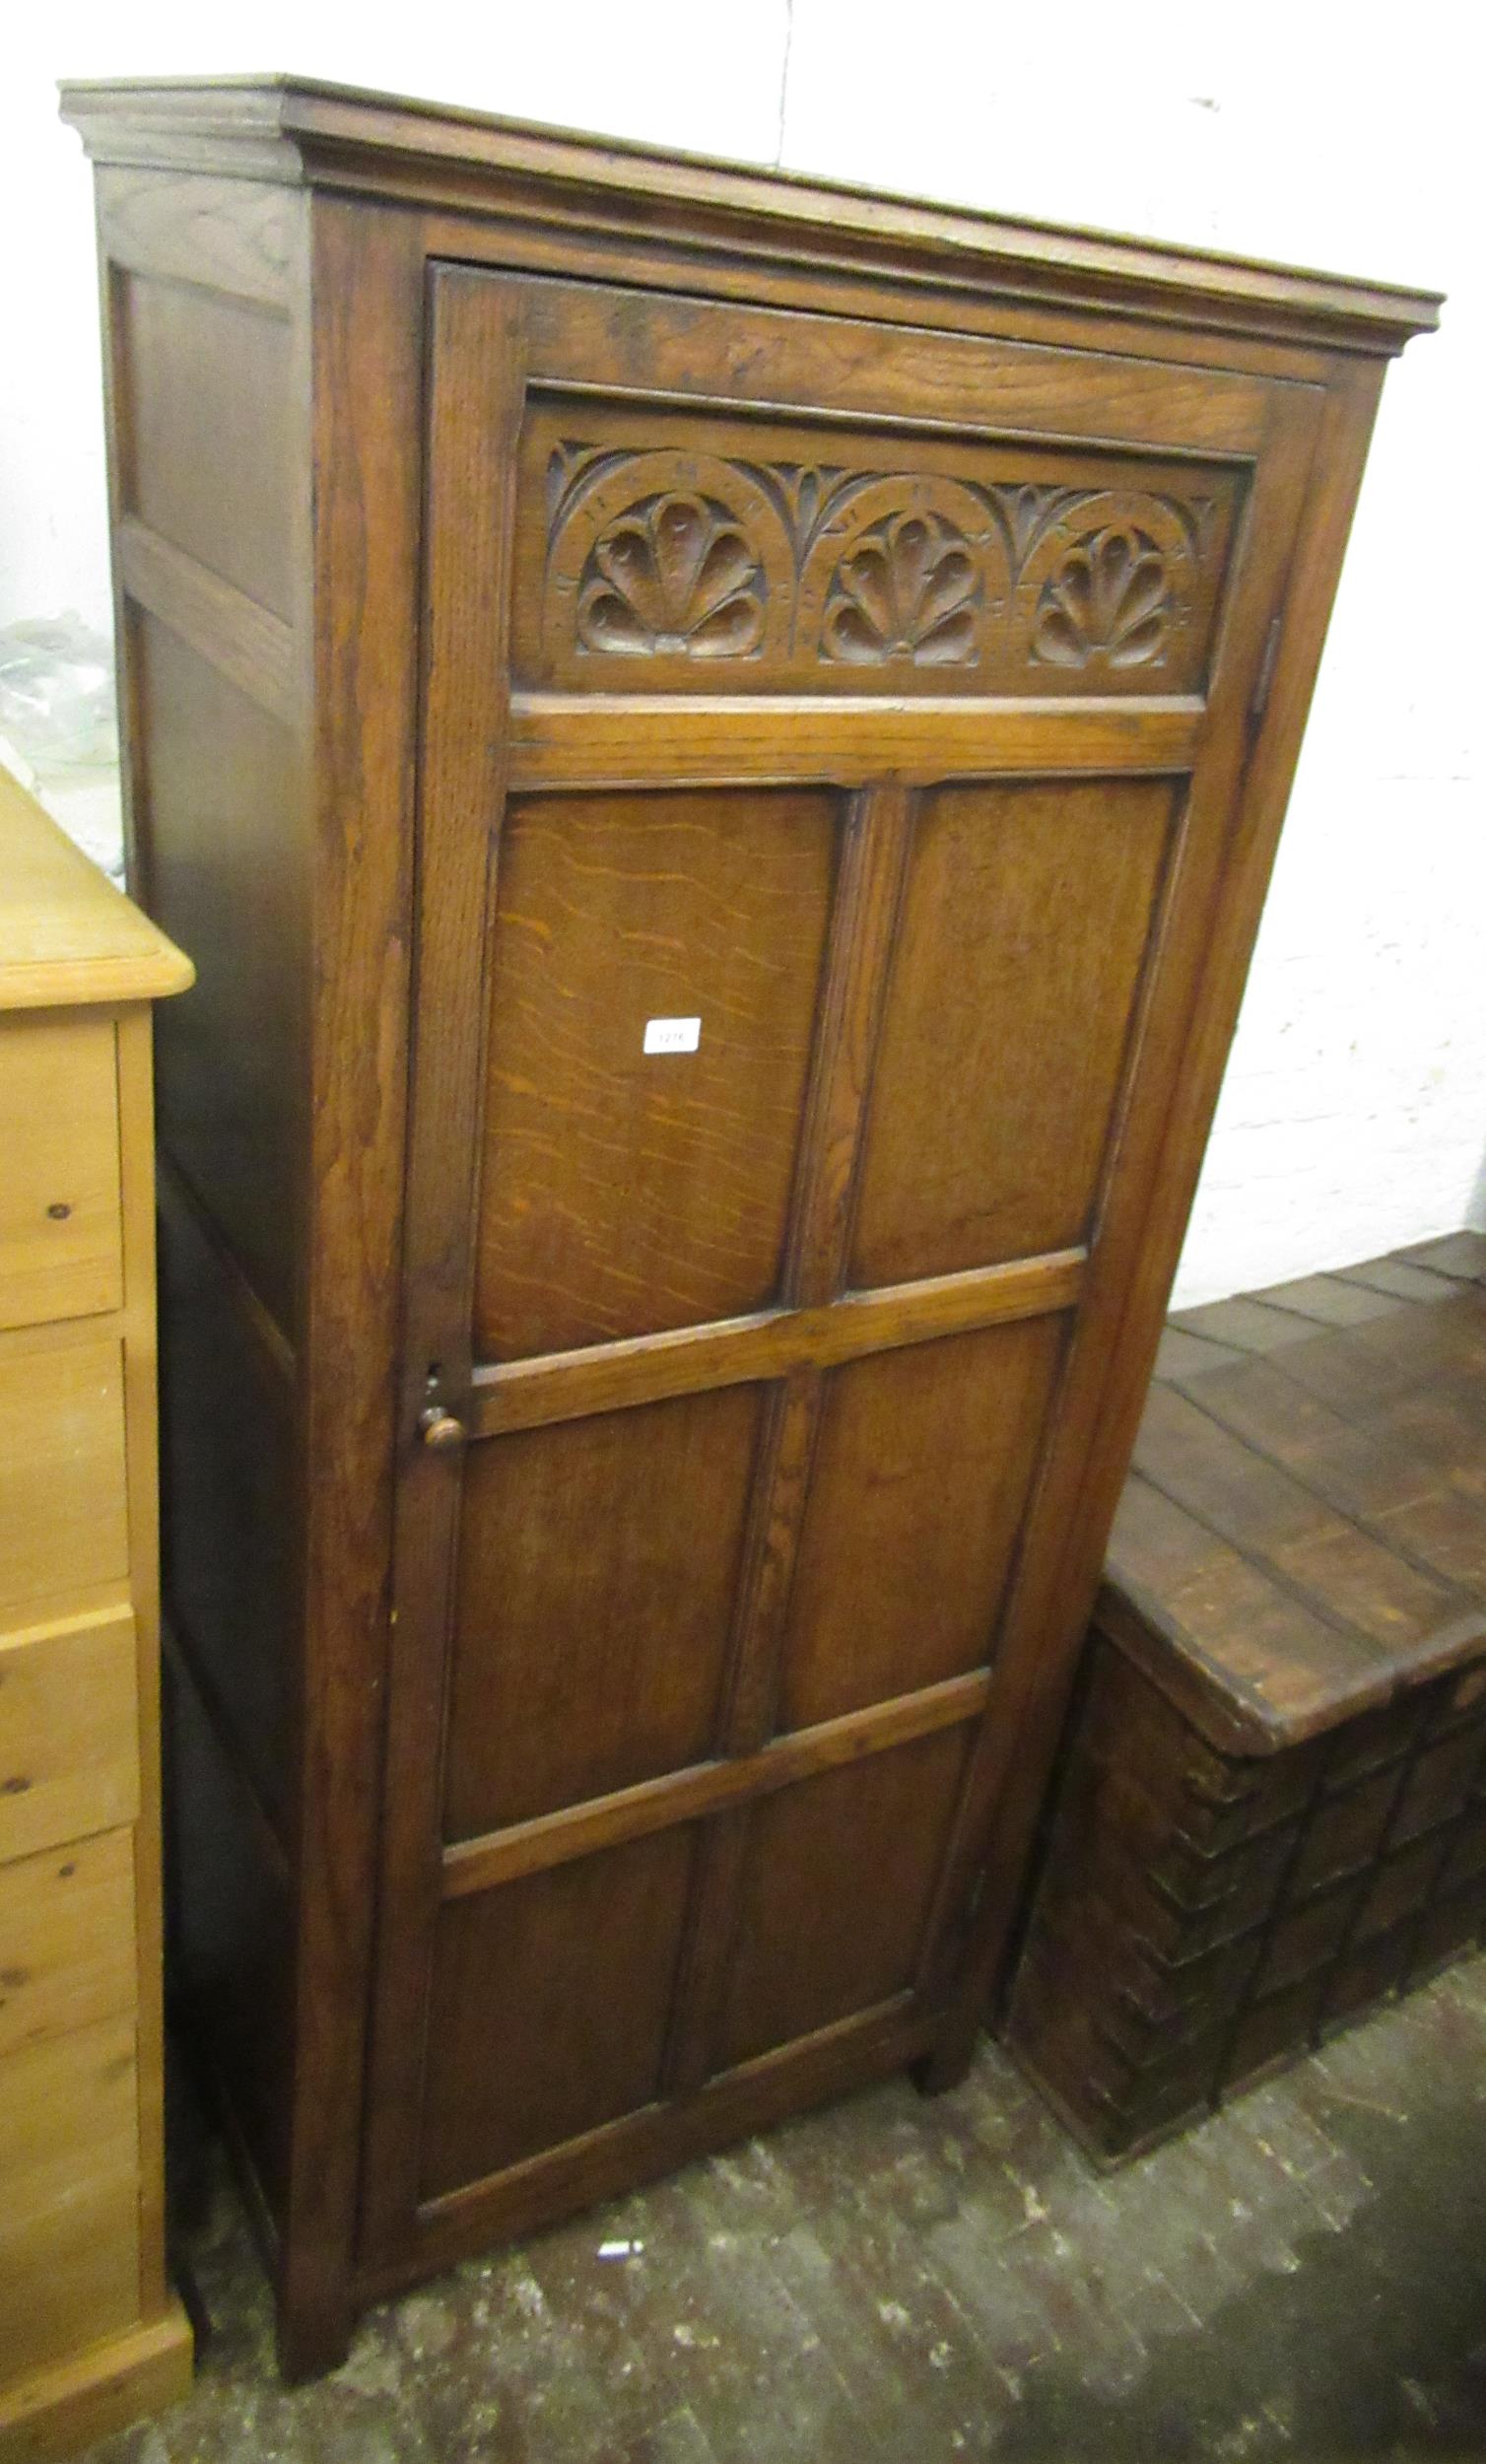 Good quality reproduction oak hall wardrobe with a single carved and panel door